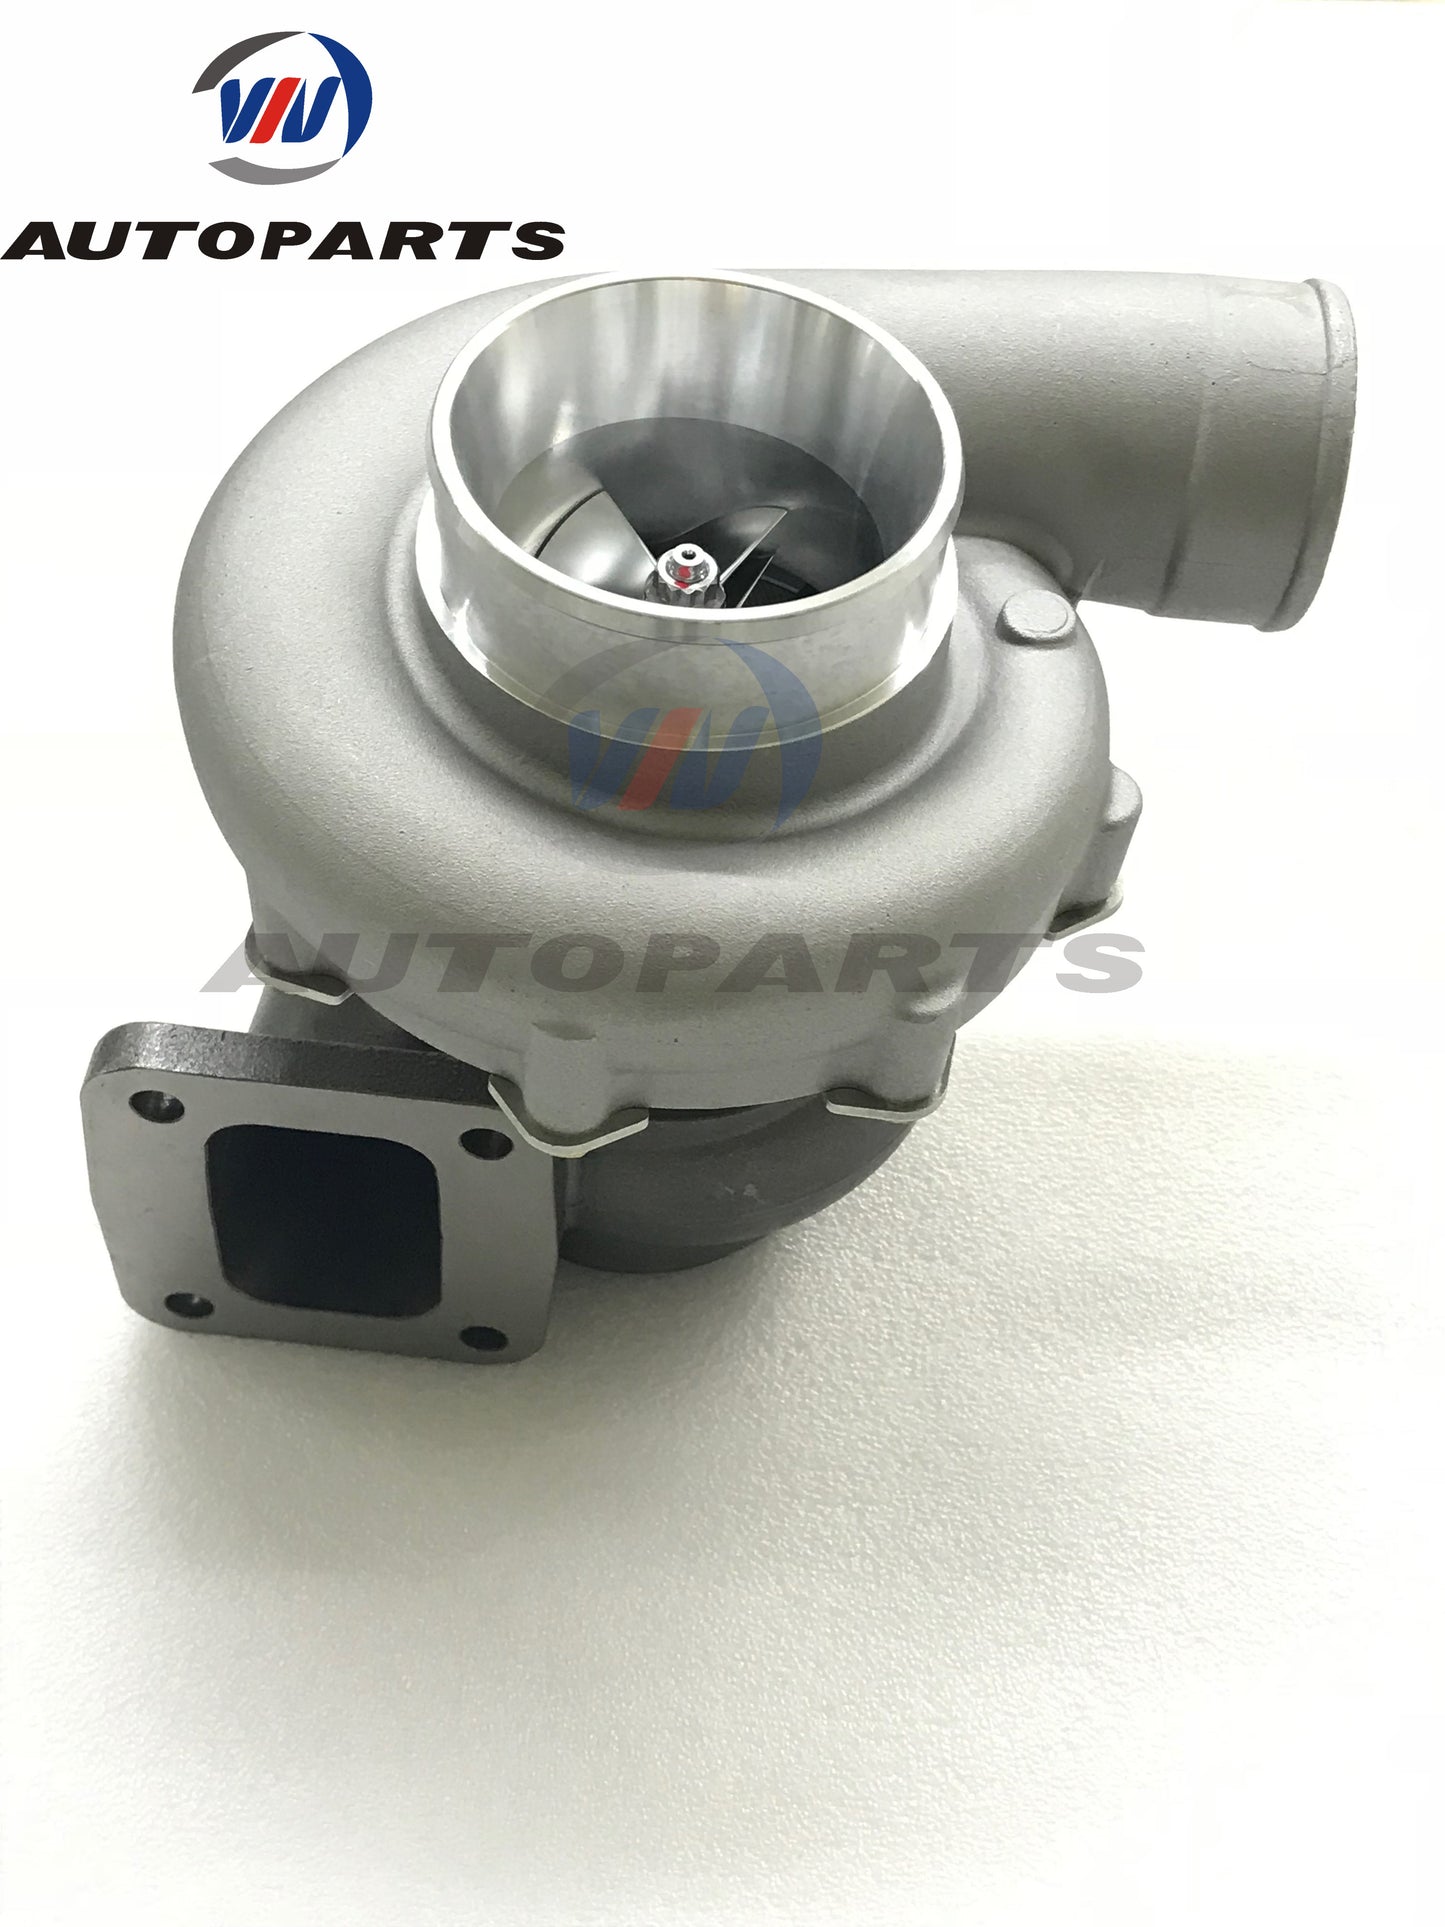 Billet T78 7875 T4 A/R.96 A/R.75 3" V band Oil Performance 800HP-1000HP Turbocharger